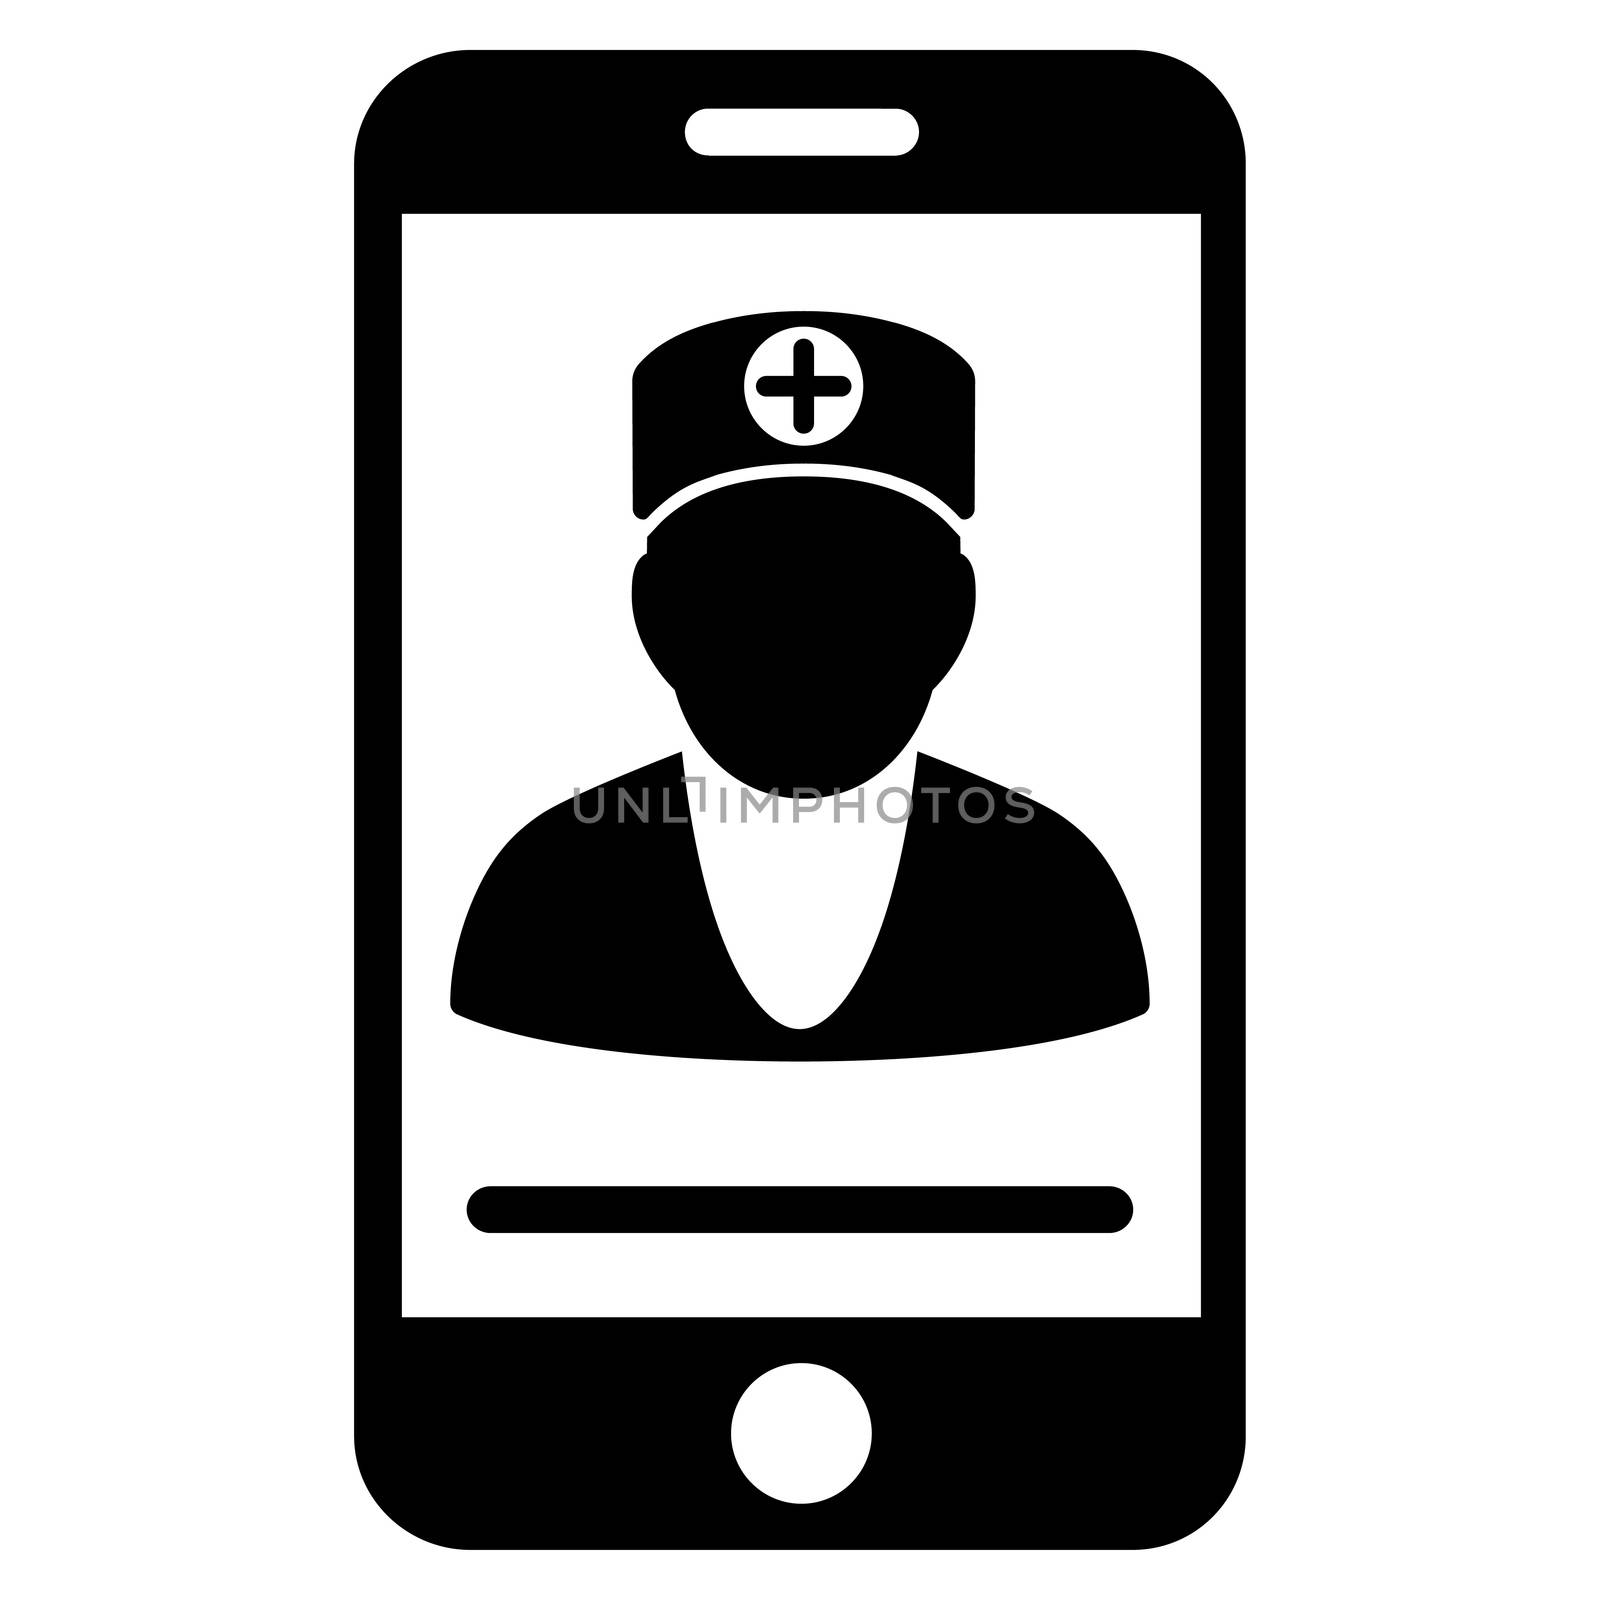 Online Doctor raster icon. Style is flat symbol, black color, rounded angles, white background.